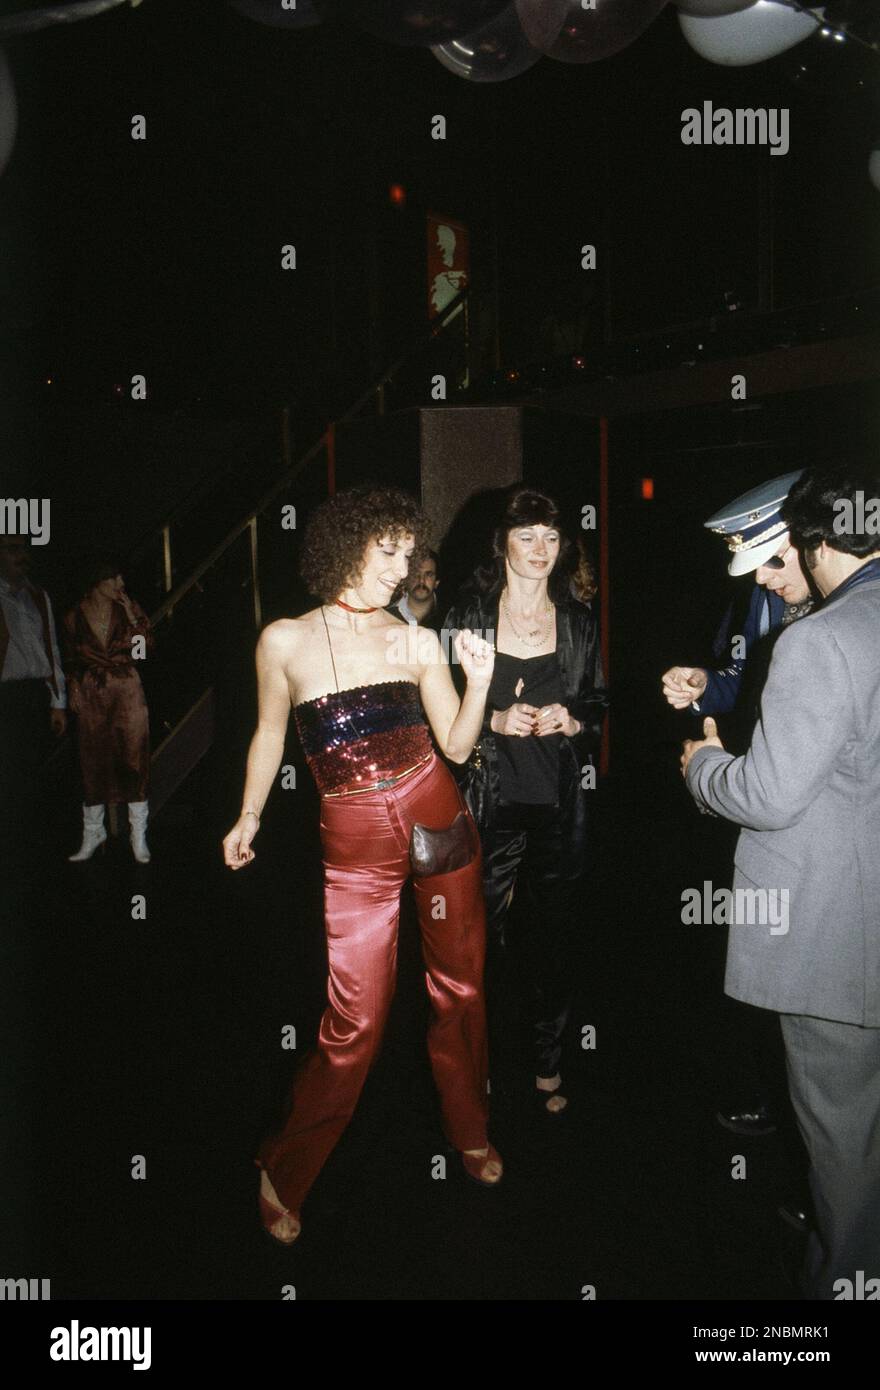 Opening night of Electric Circus disco at 100 Fifth Avenue, New York ...